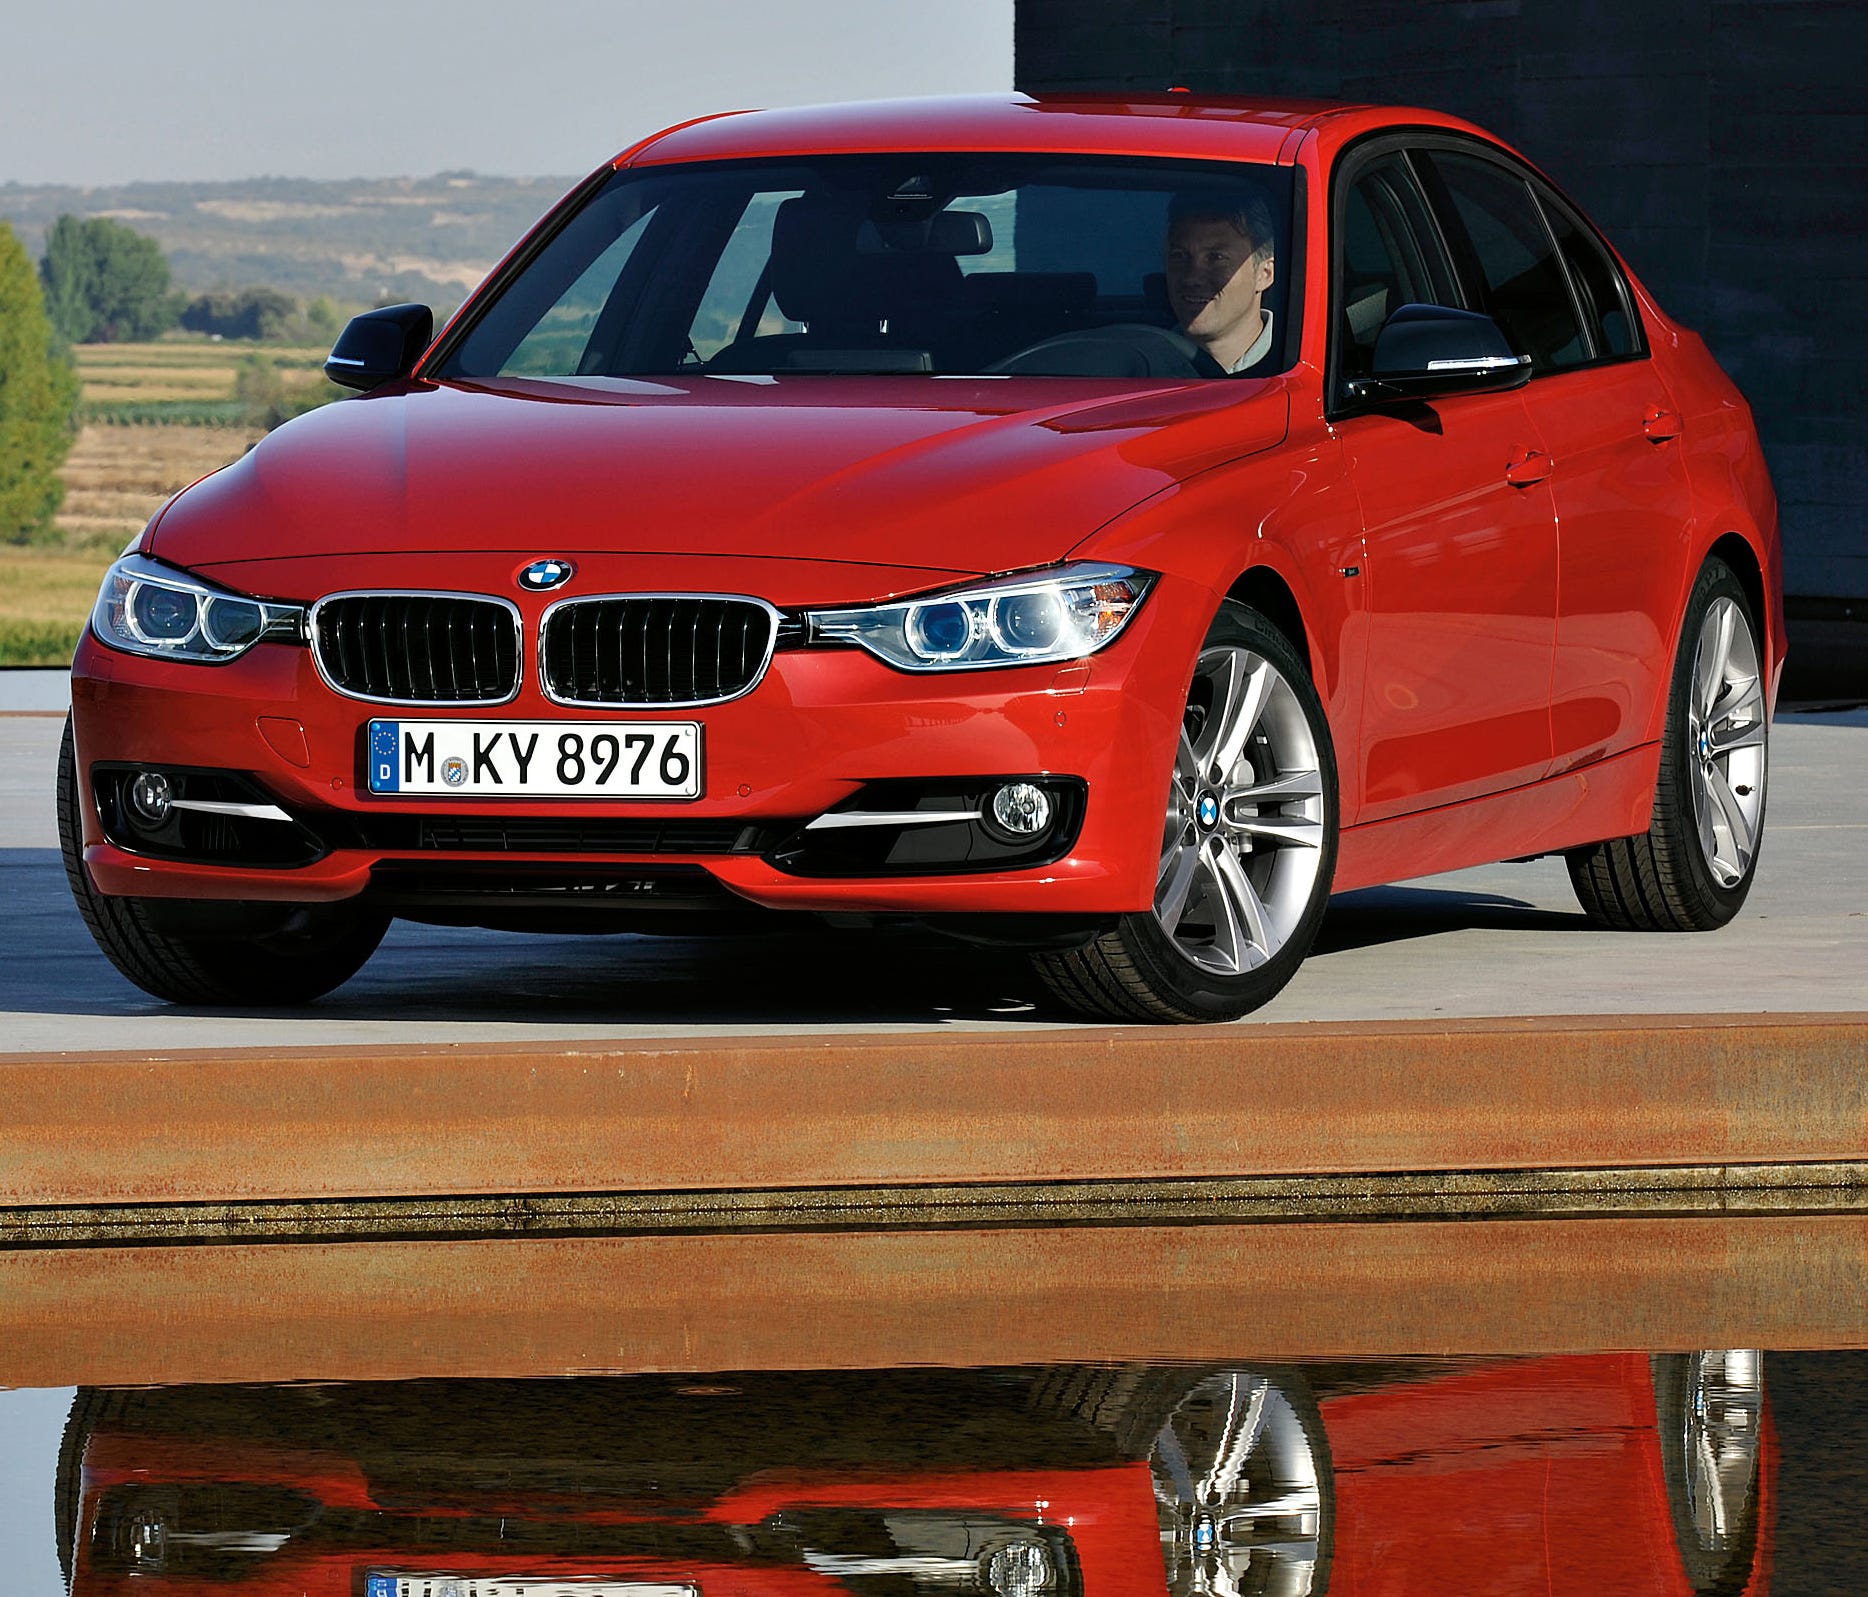 The 2011 BMW 328i lost 6.03%